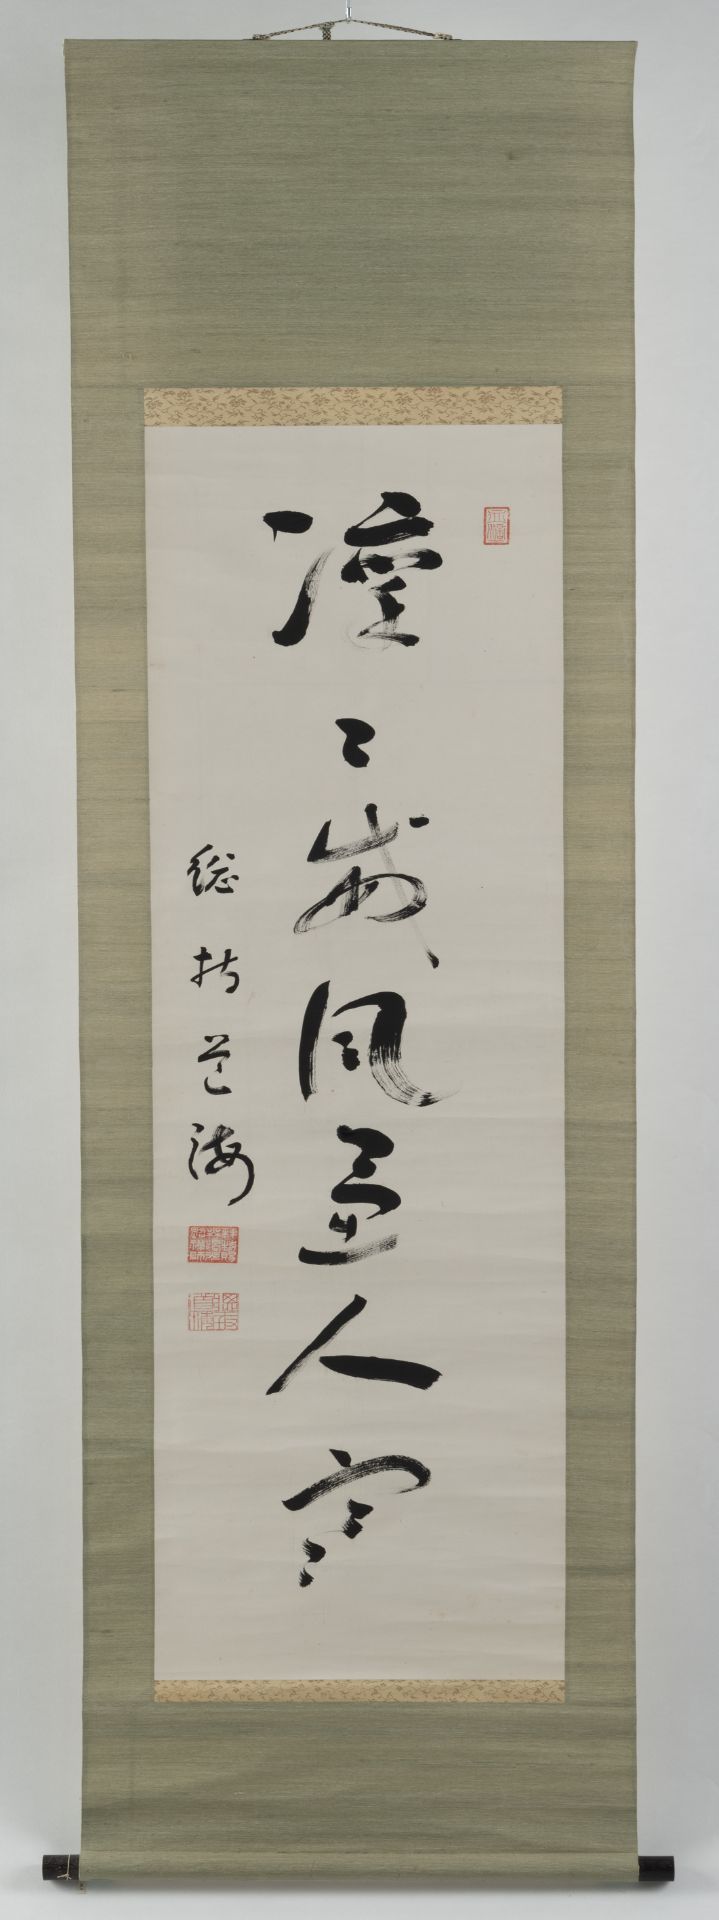 A PAINTING DEPICTING A LOTUS LEAF AND A BIRD AFTER KANŌ TAN'YŪ AND A CALLIGRAPHY WITH A ZEN SAYING, - Image 3 of 7